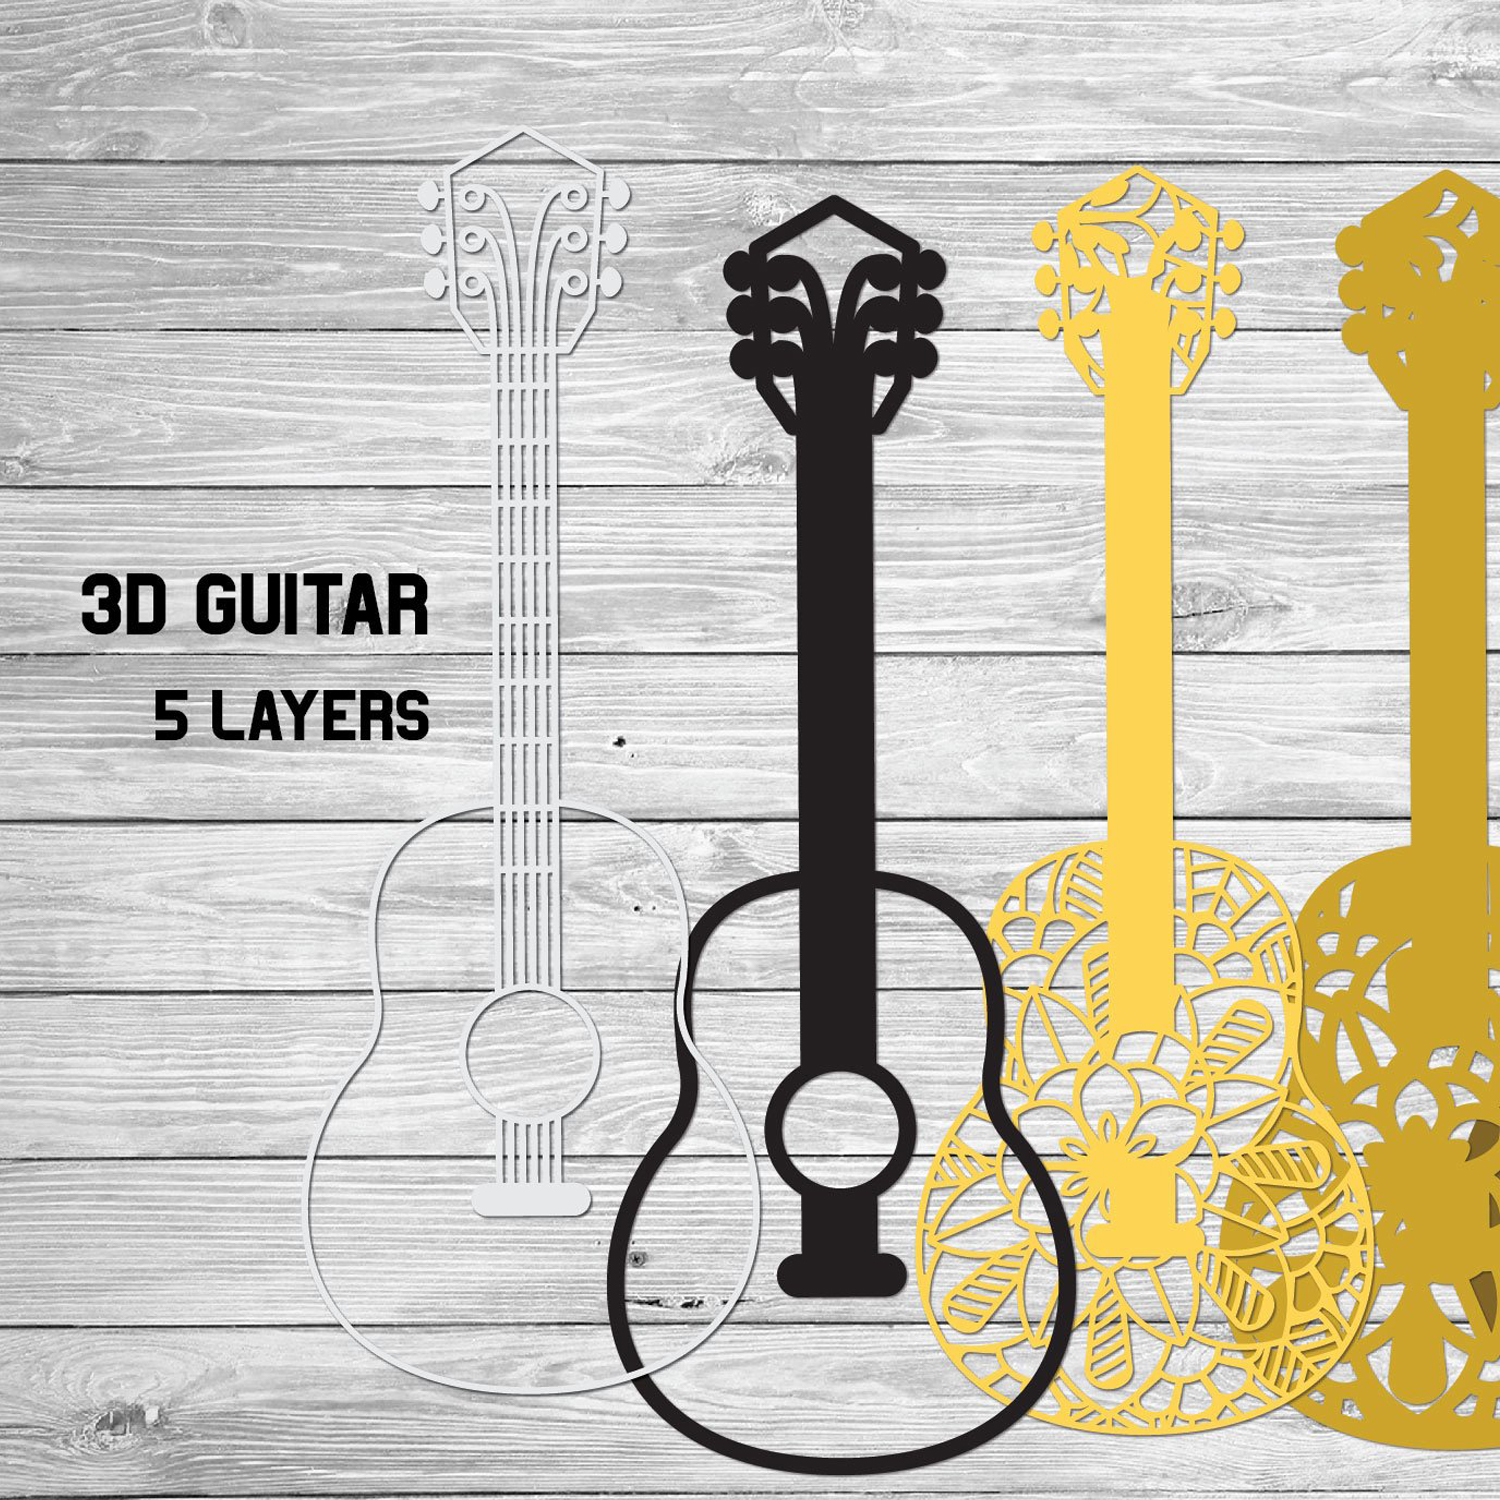 Guitar with contours and different textures.